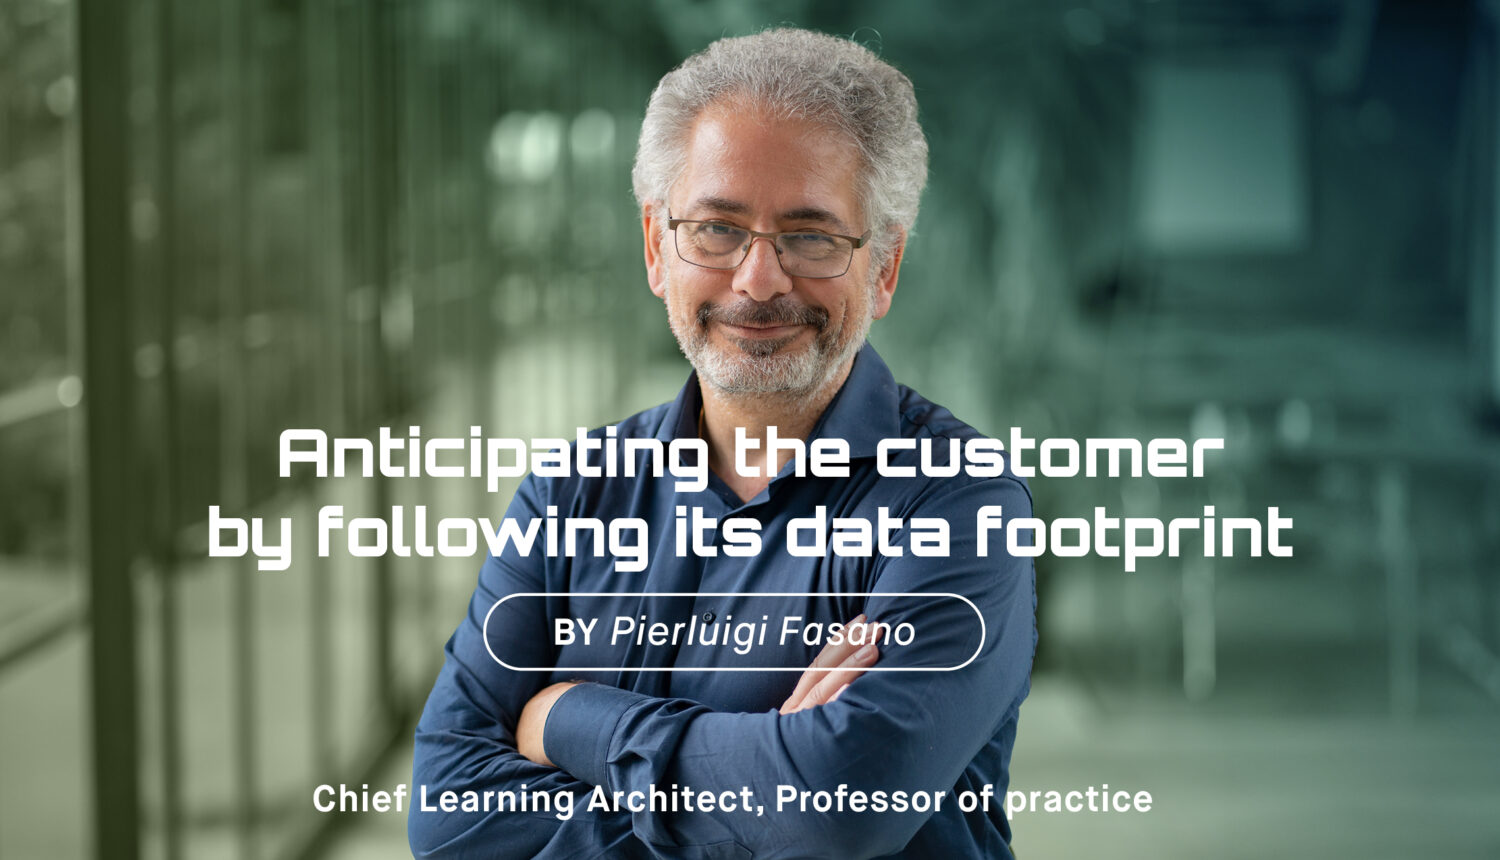 Anticipating the customer by following its data footprint